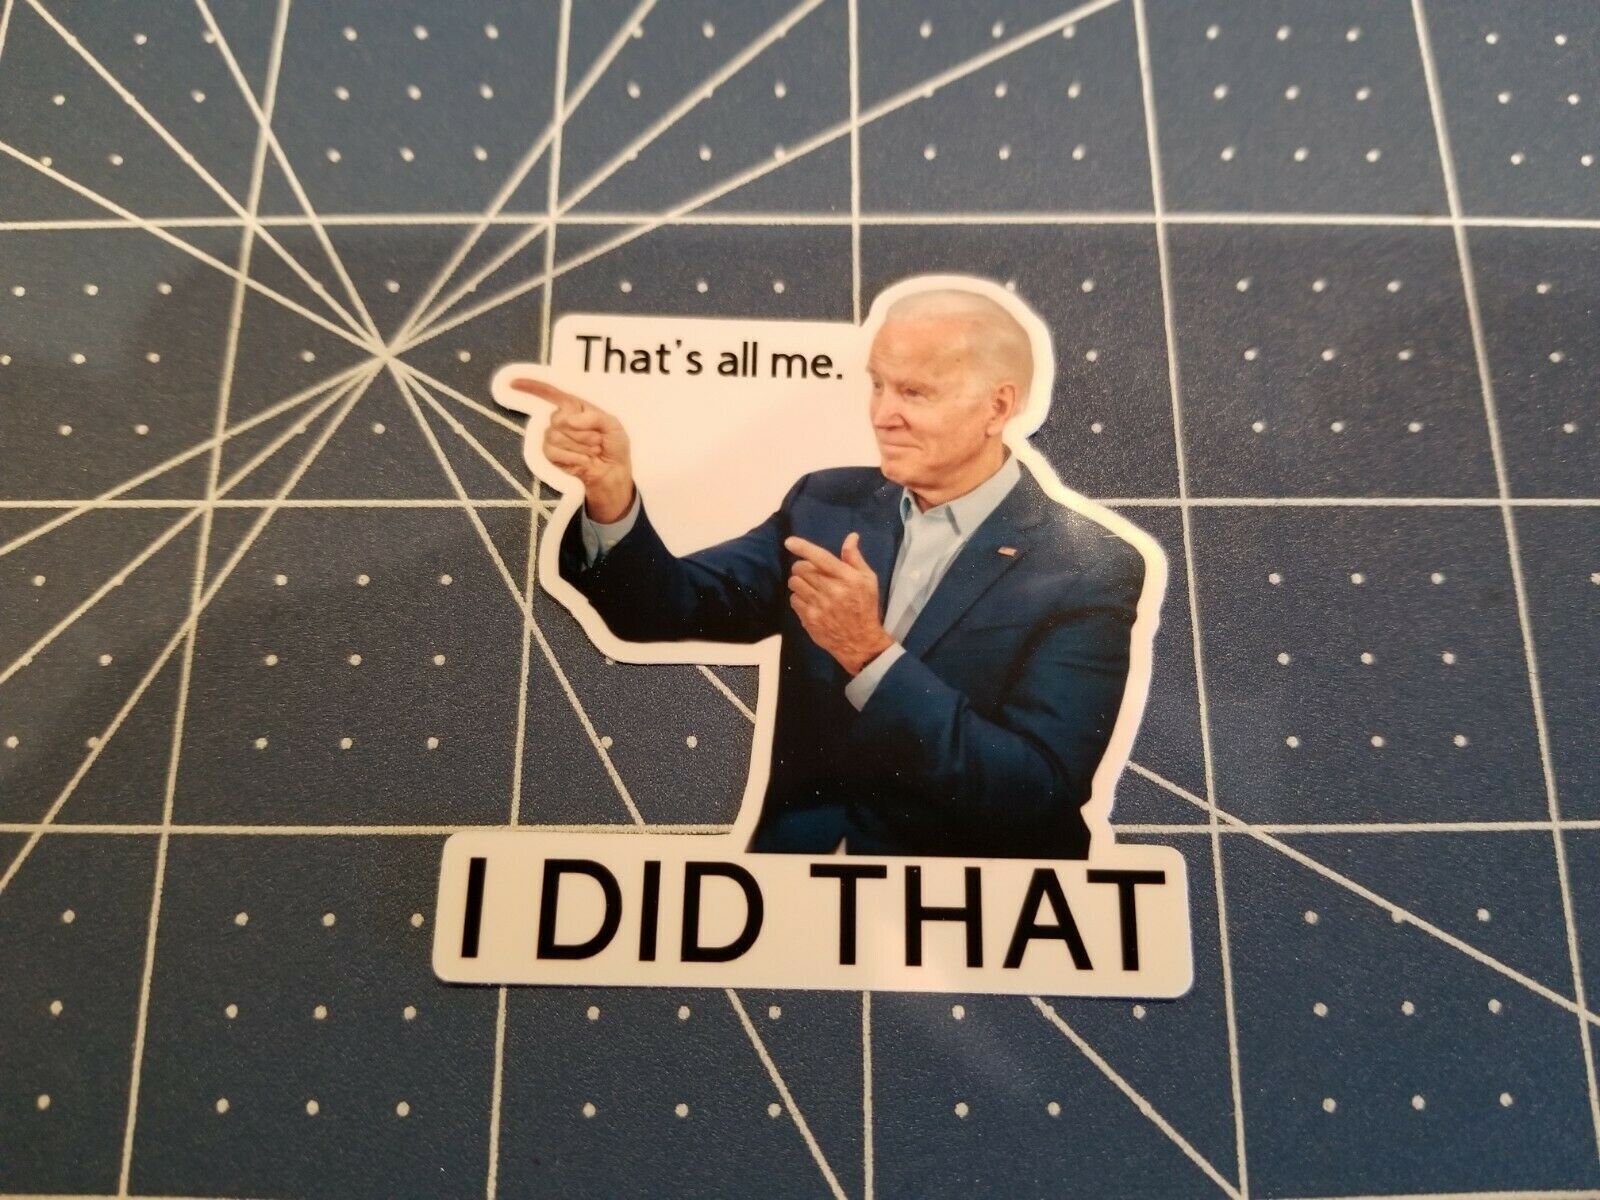 100 PCS JOE BIDEN FUNNY STICKER THAT'S ALL ME I DID THAT. (POINTED TO YOUR LEFT)